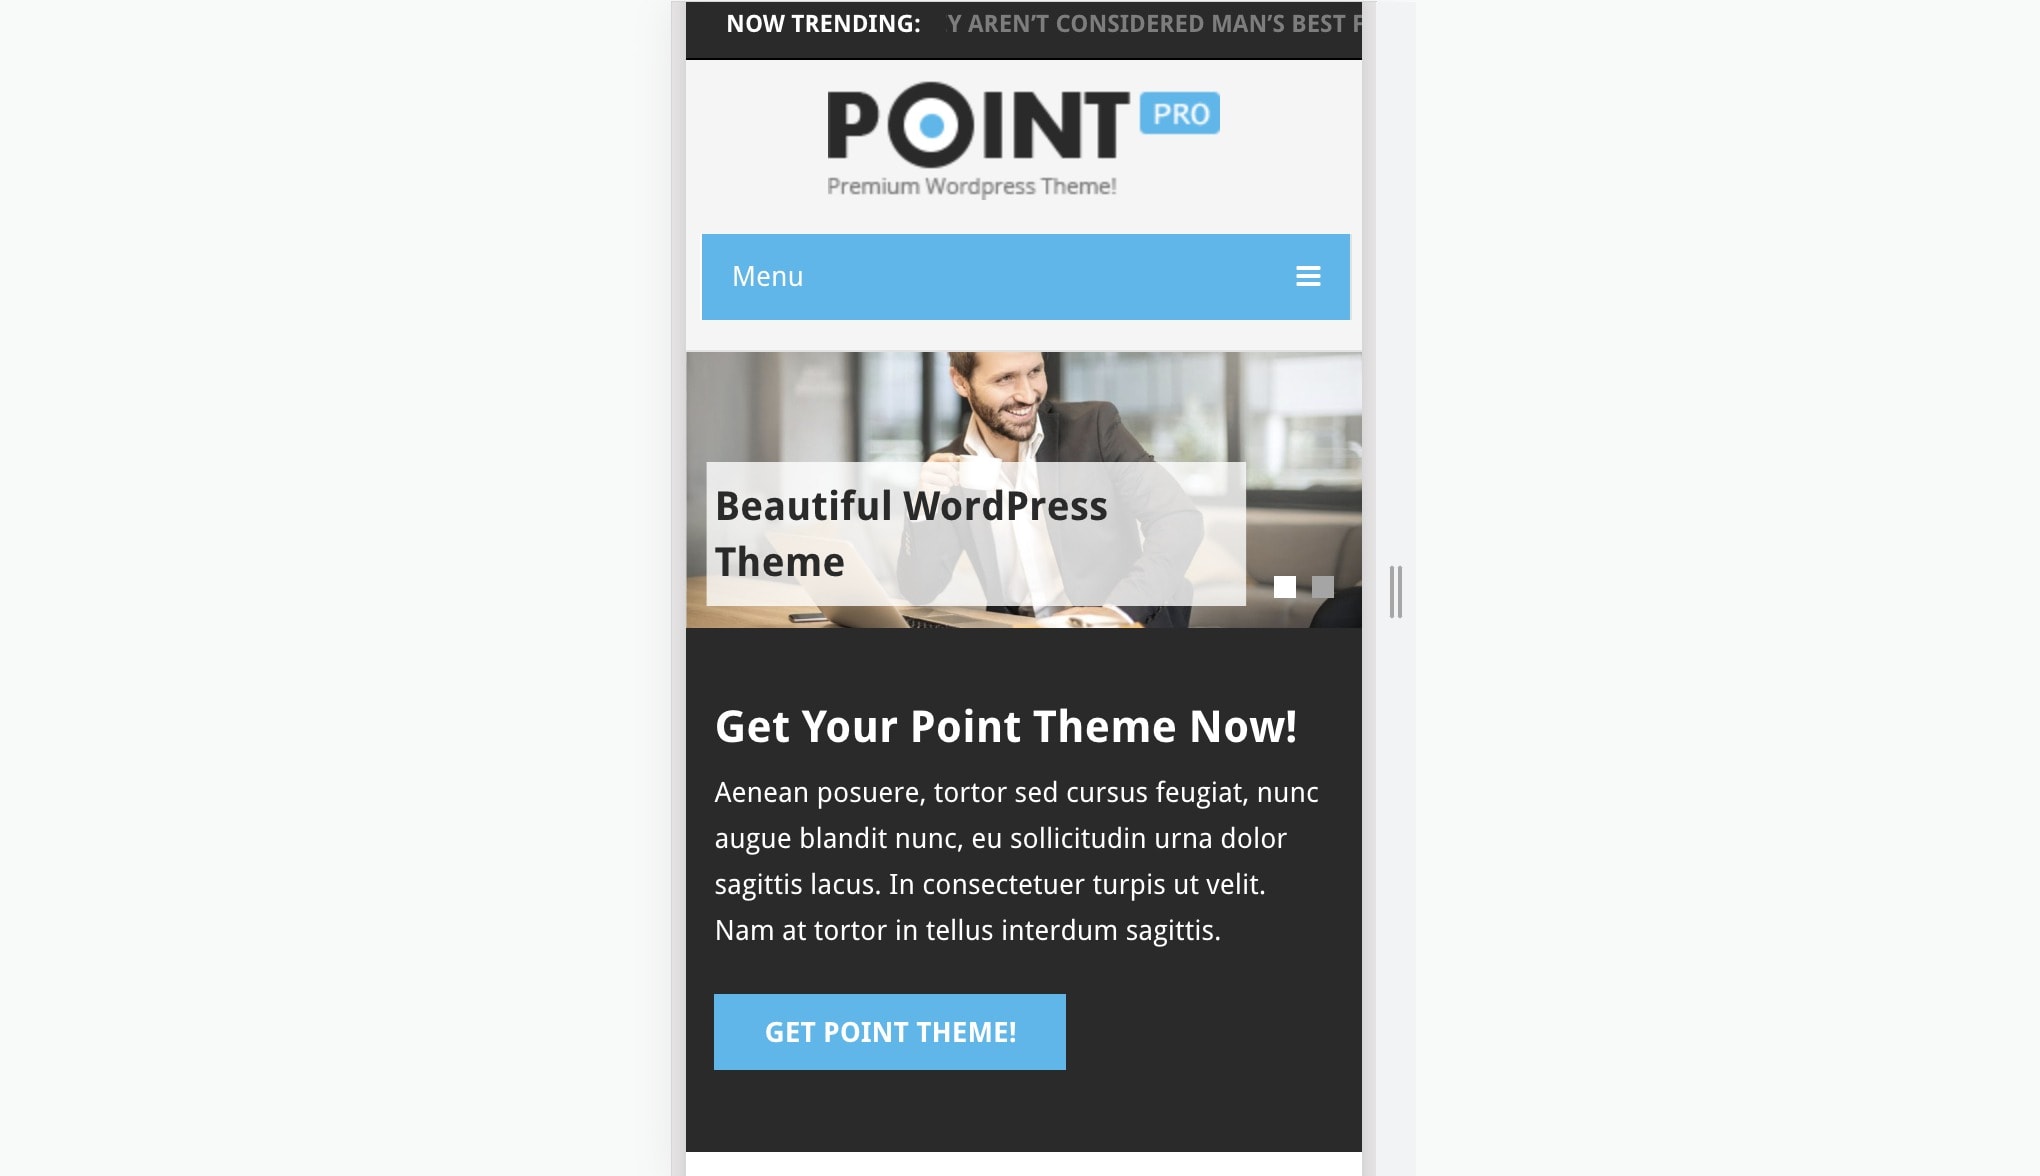 point pro mobile optimized layout